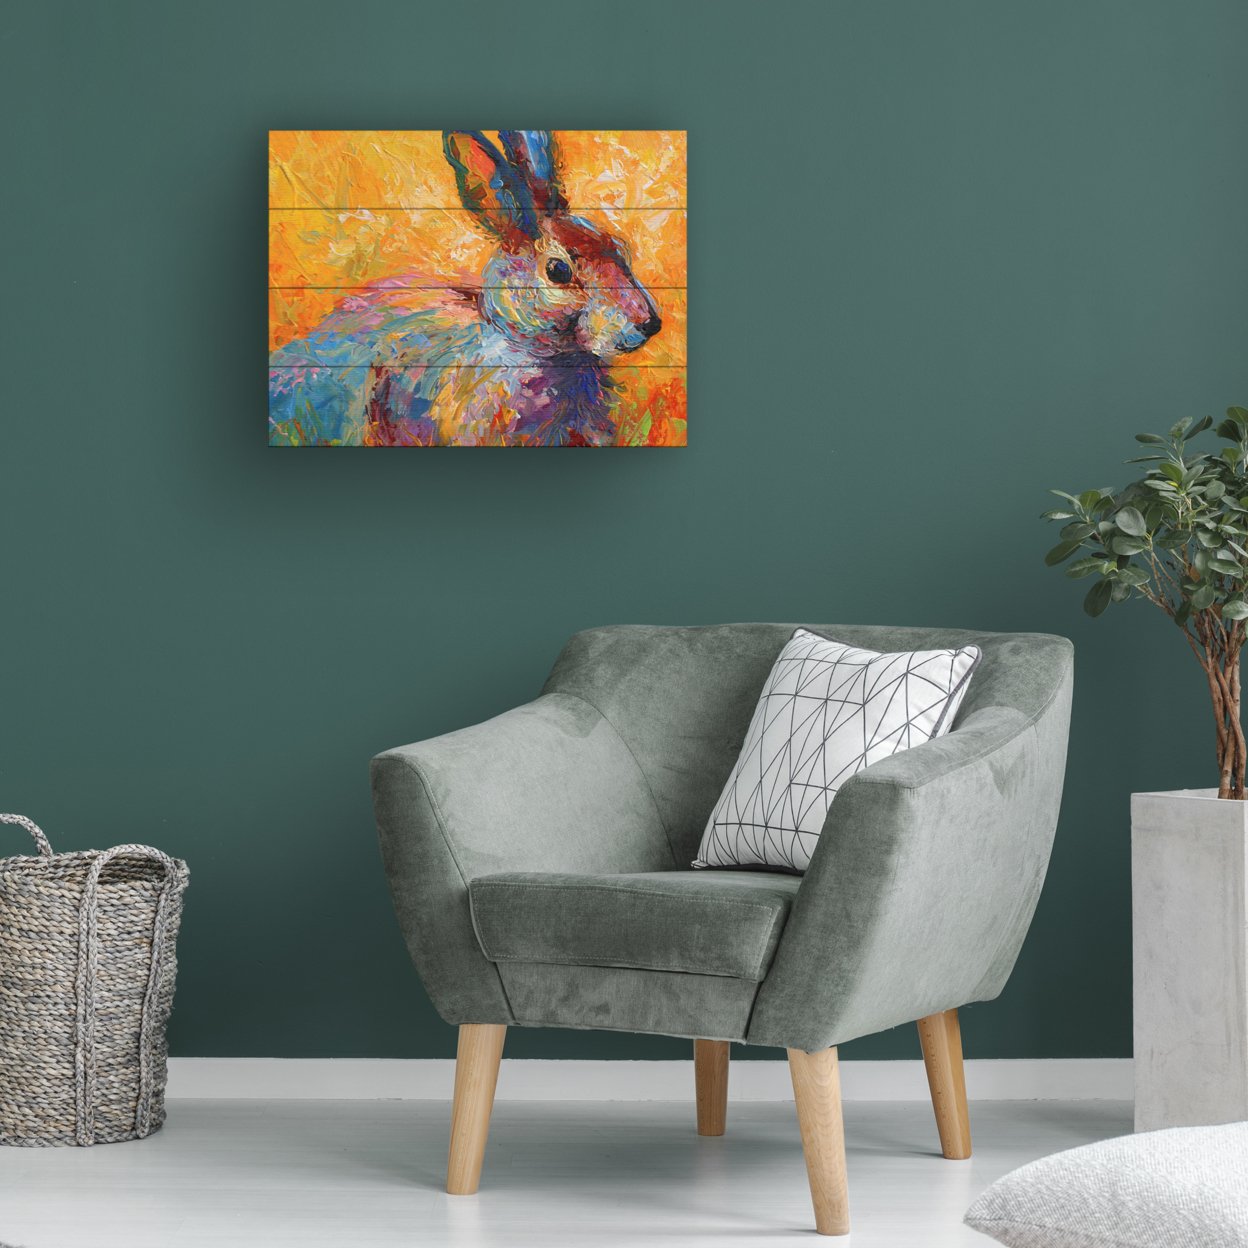 Wall Art 12 X 16 Inches Titled Bunny IV Ready To Hang Printed On Wooden Planks